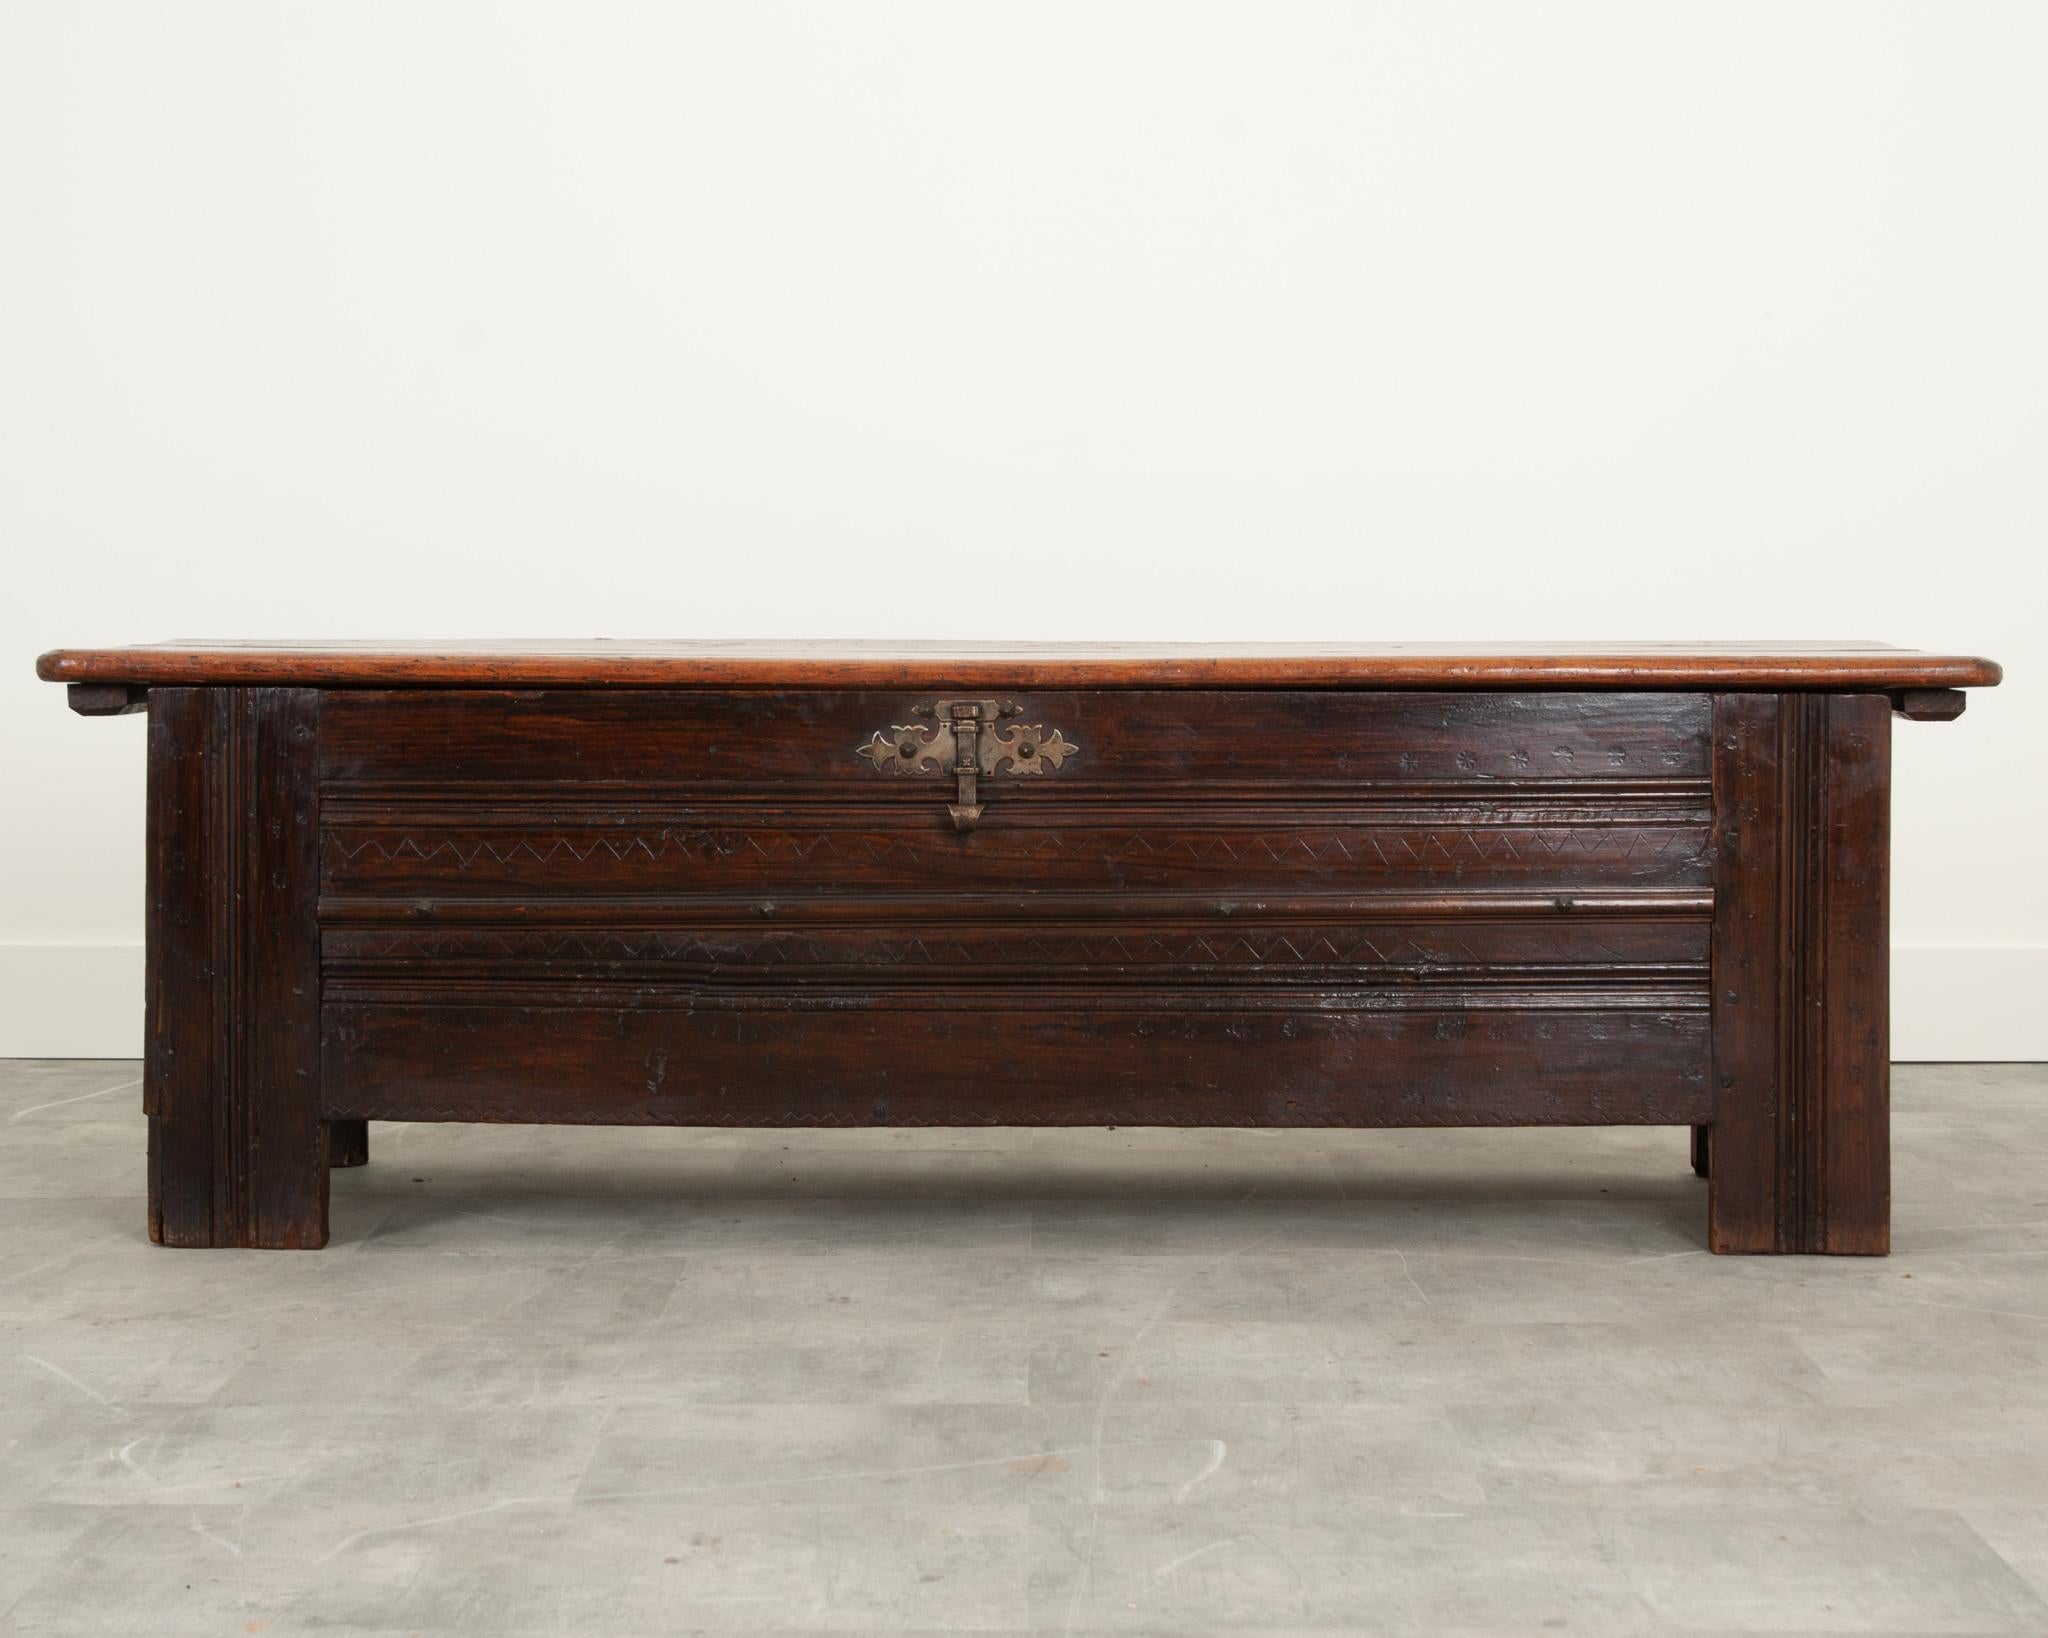 French solid oak coffer in wonderful antique condition. Made in the 1700’s, this coffer has hand-crafted details throughout that show the craftsmanship of many centuries past. The facade showcases decorative forged metal nails, a large metal latch